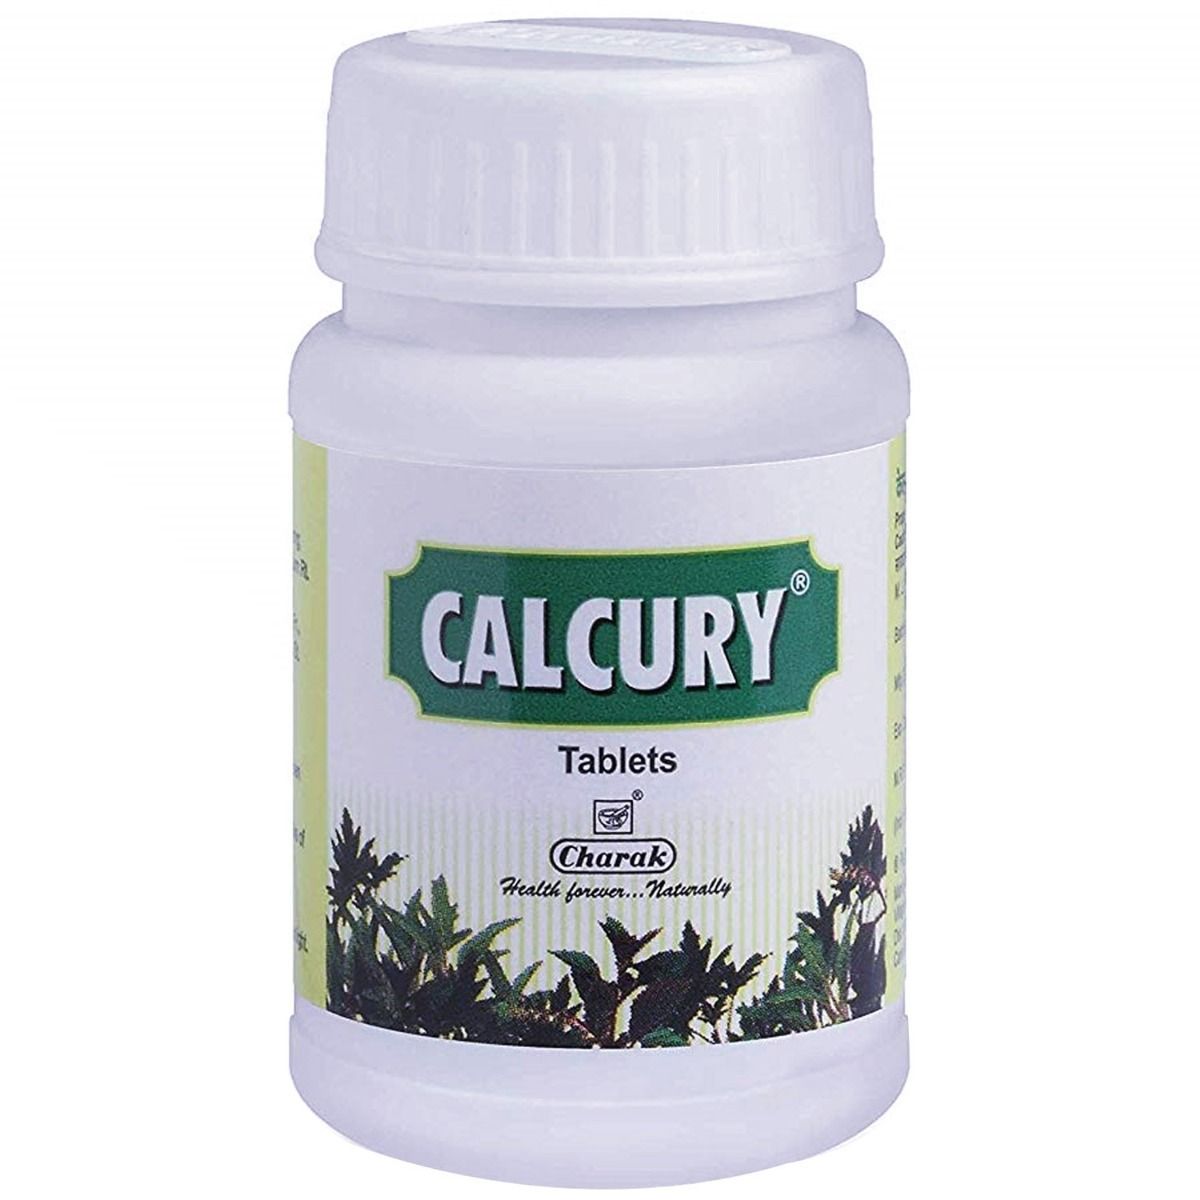 Calcury, 40 Tablets, Pack of 1 